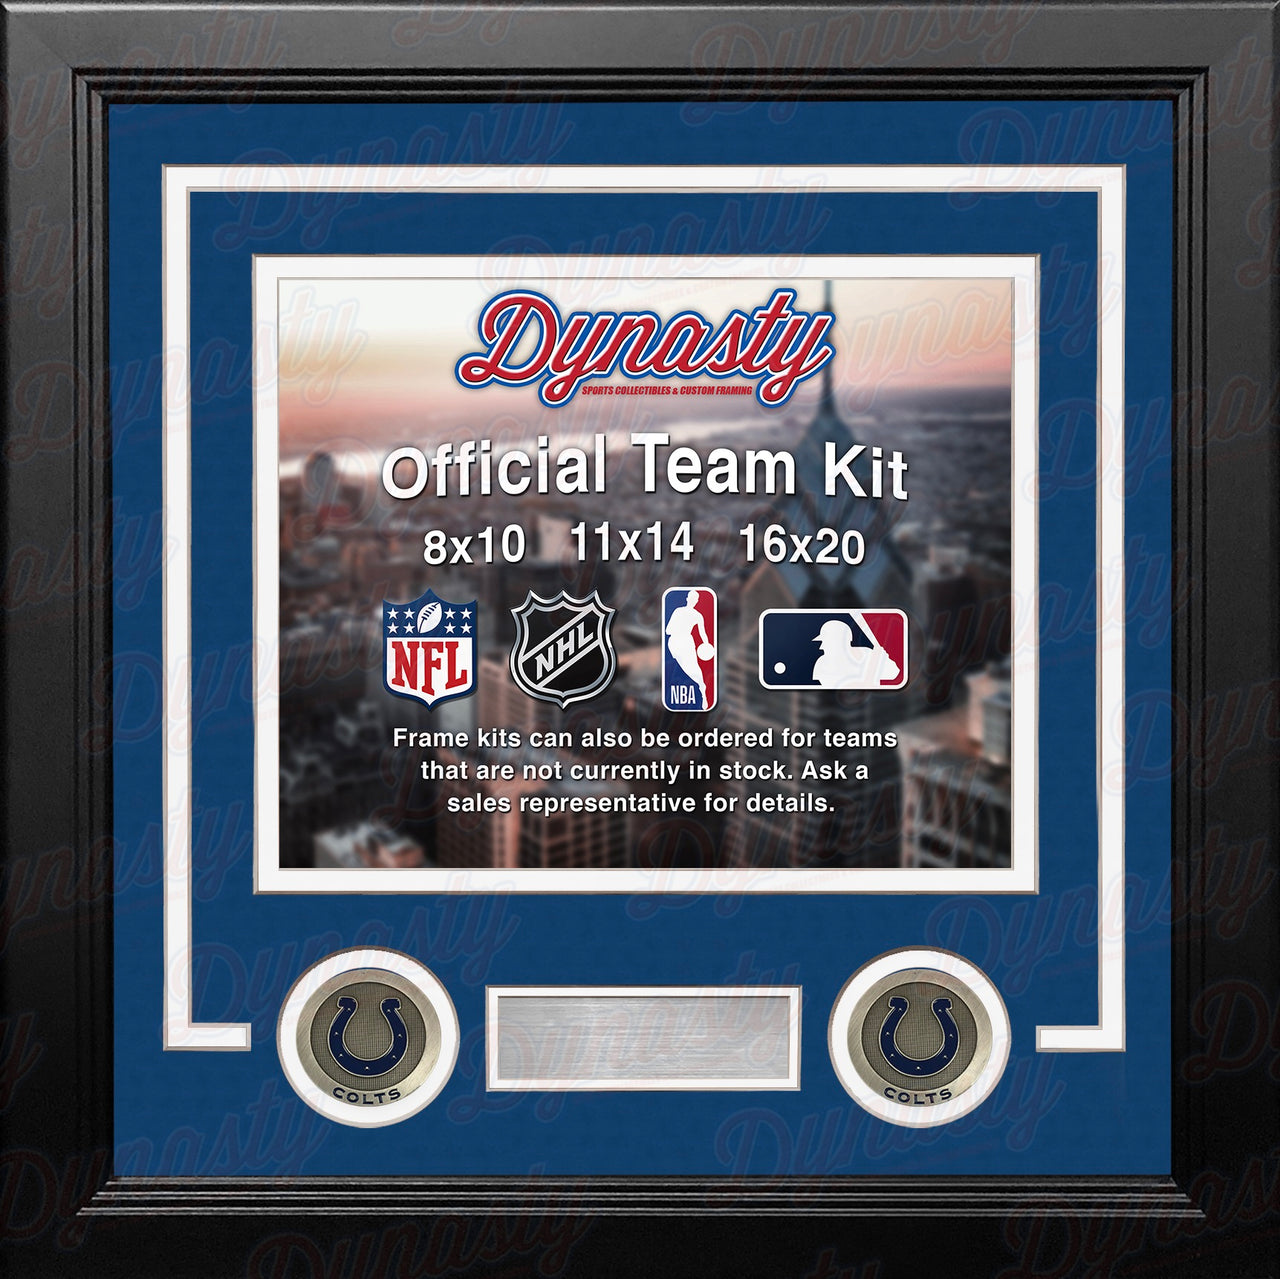 Indianapolis Colts Custom NFL Football 11x14 Picture Frame Kit (Multiple Colors) - Dynasty Sports & Framing 